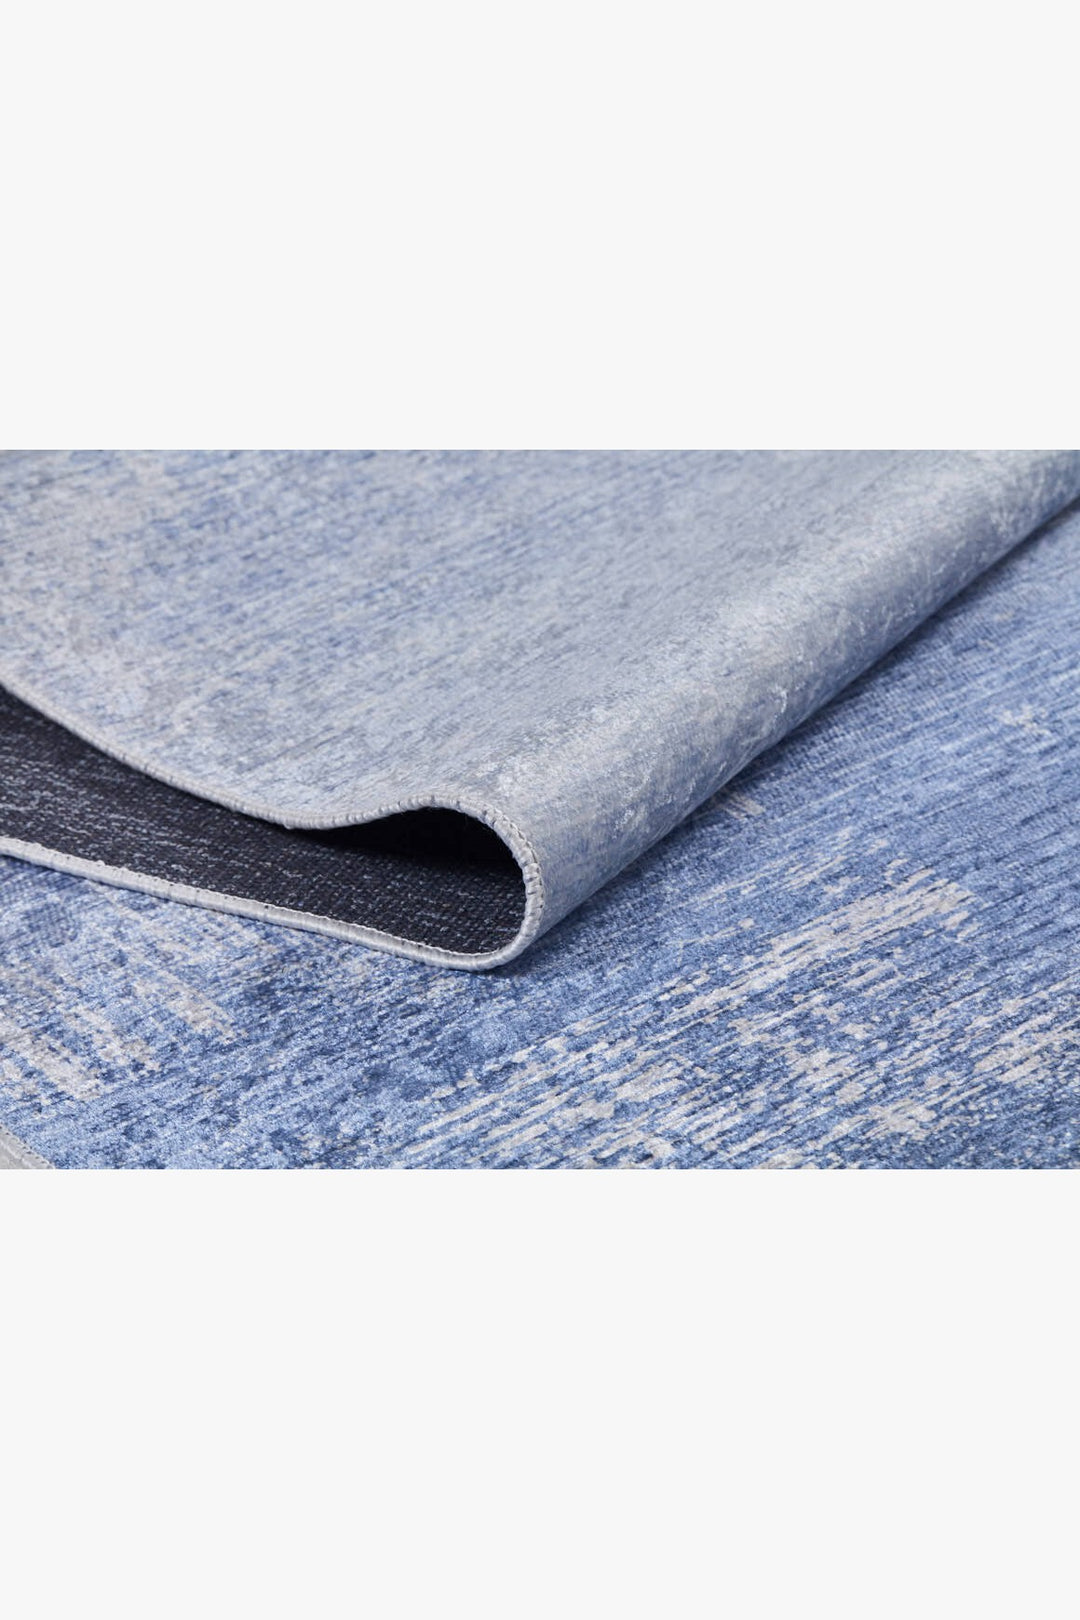 machine-washable-area-rug-Tone-on-Tone-Ombre-Modern-Collection-Blue-JR329